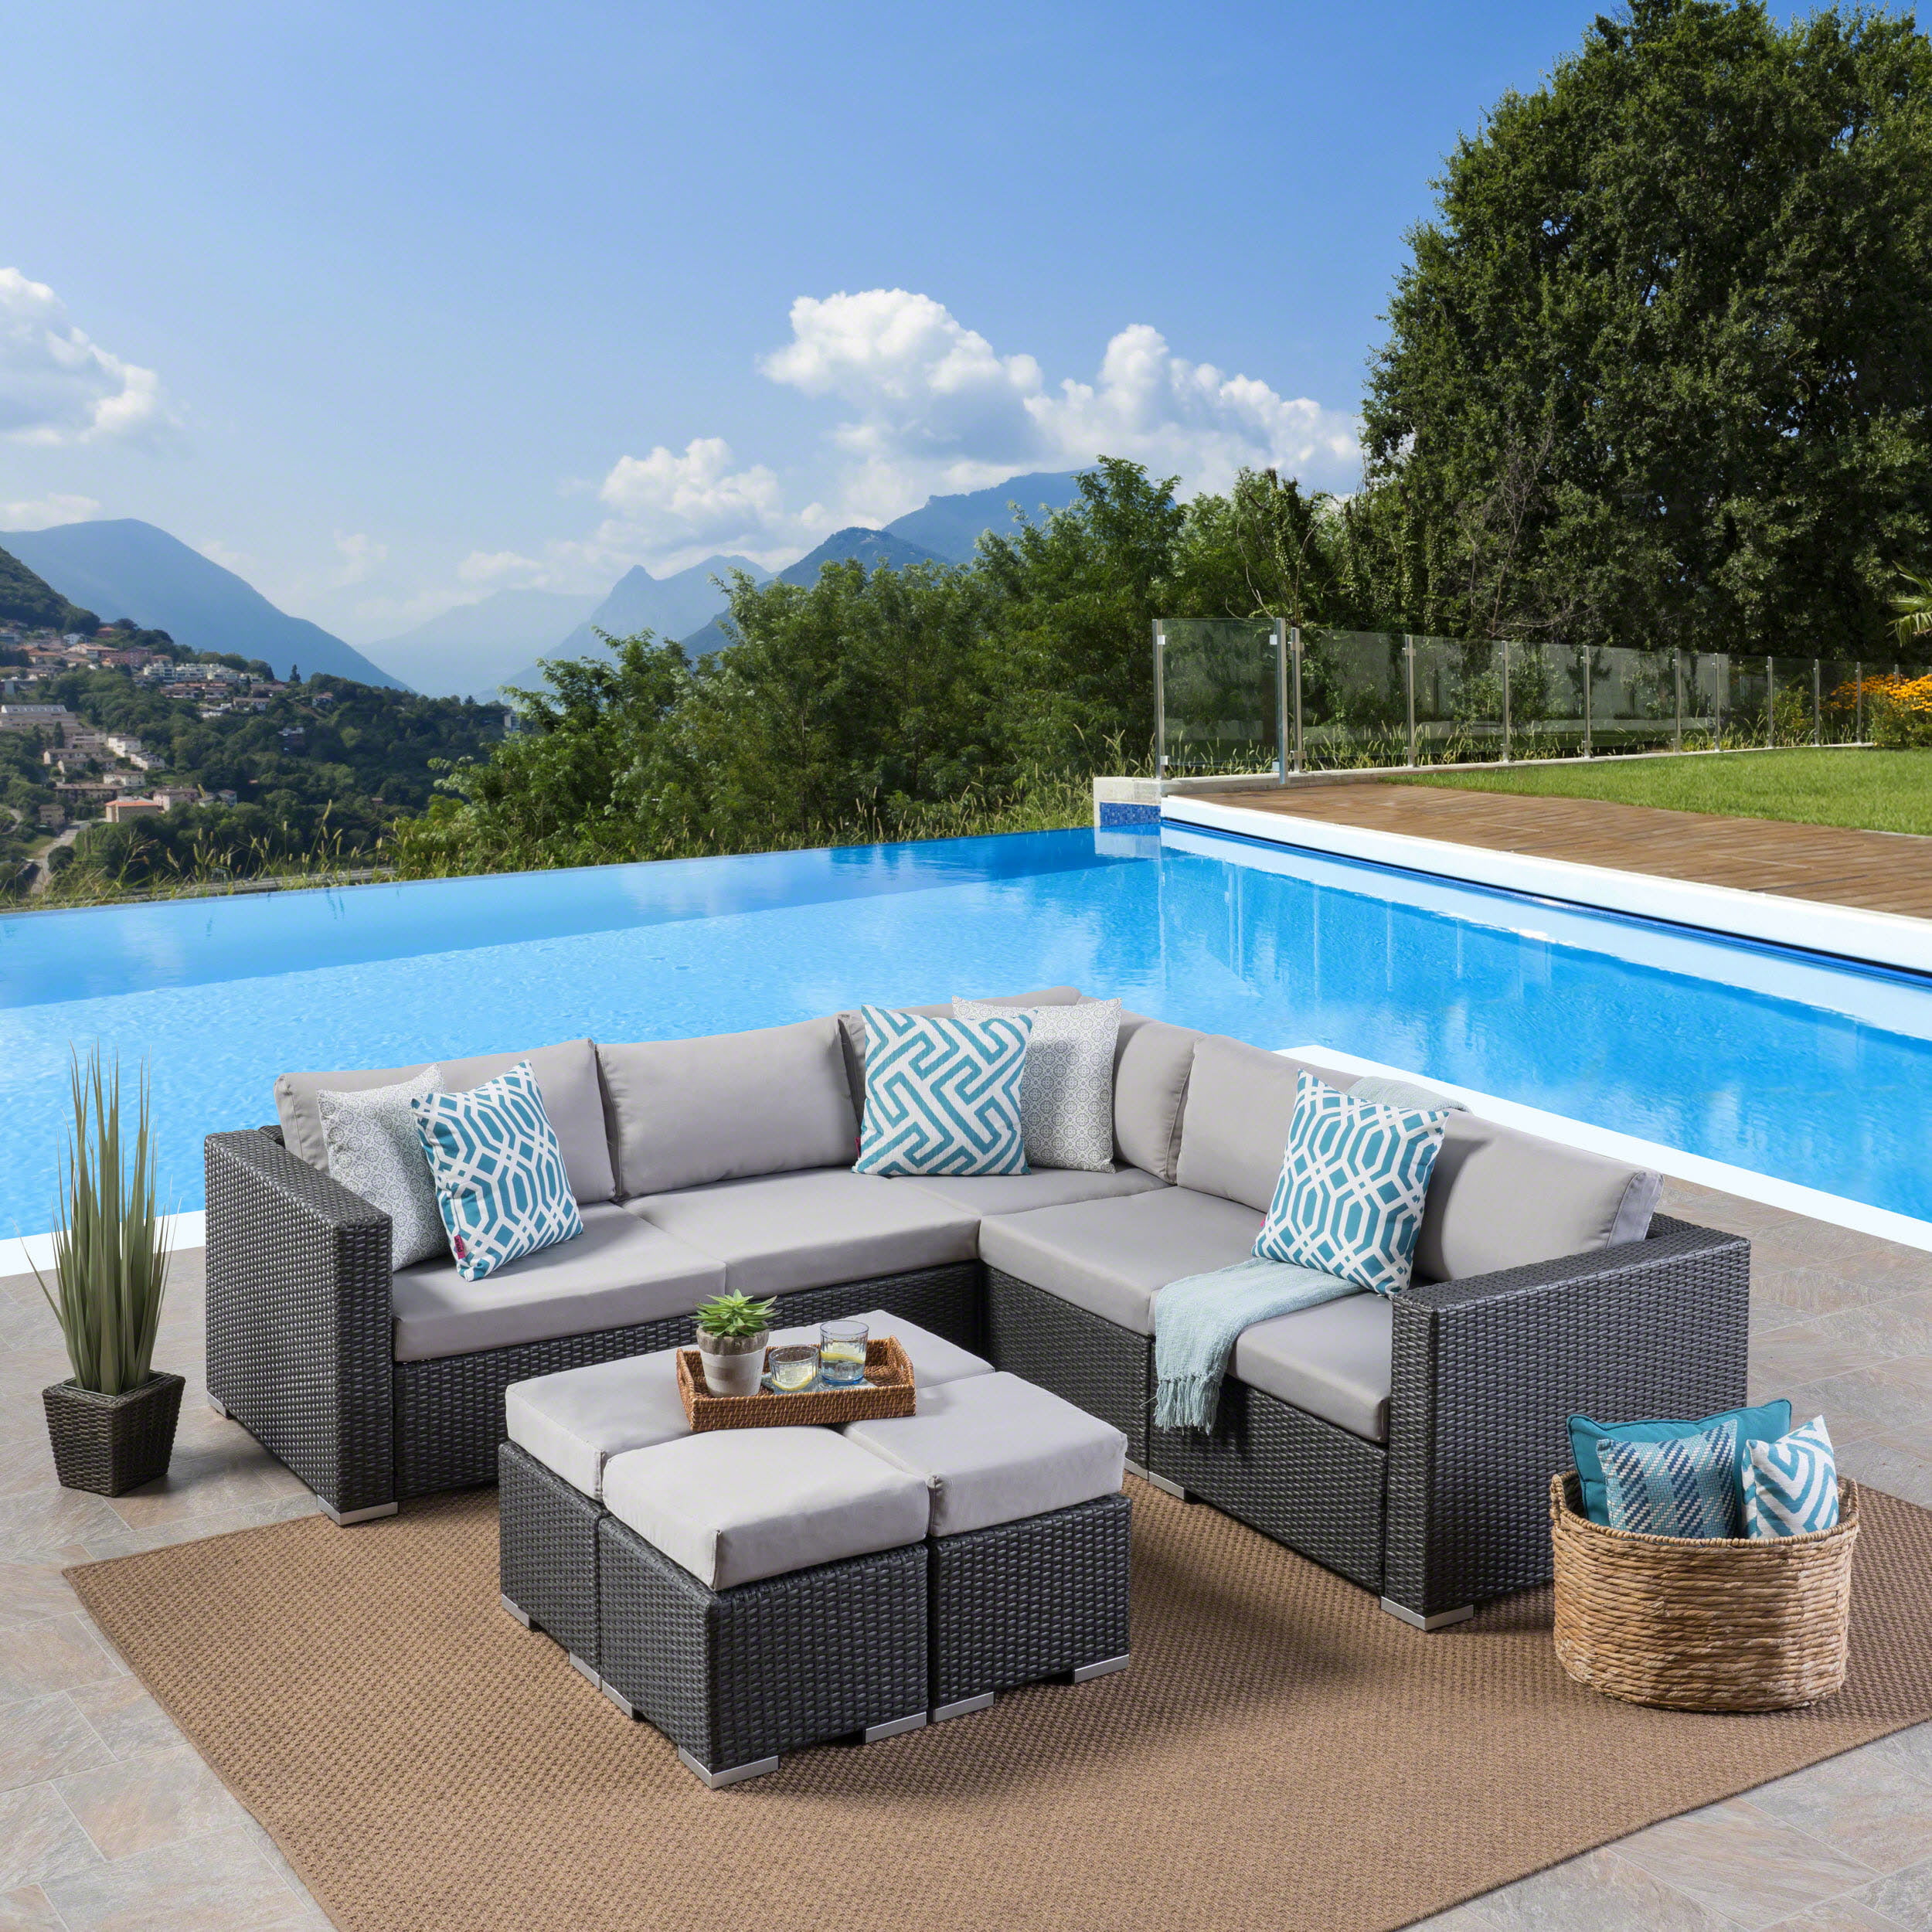 Faviola Outdoor 9 Piece Wicker Sectional Sofa Set With Aluminum Frame And Cushions Grey Silver